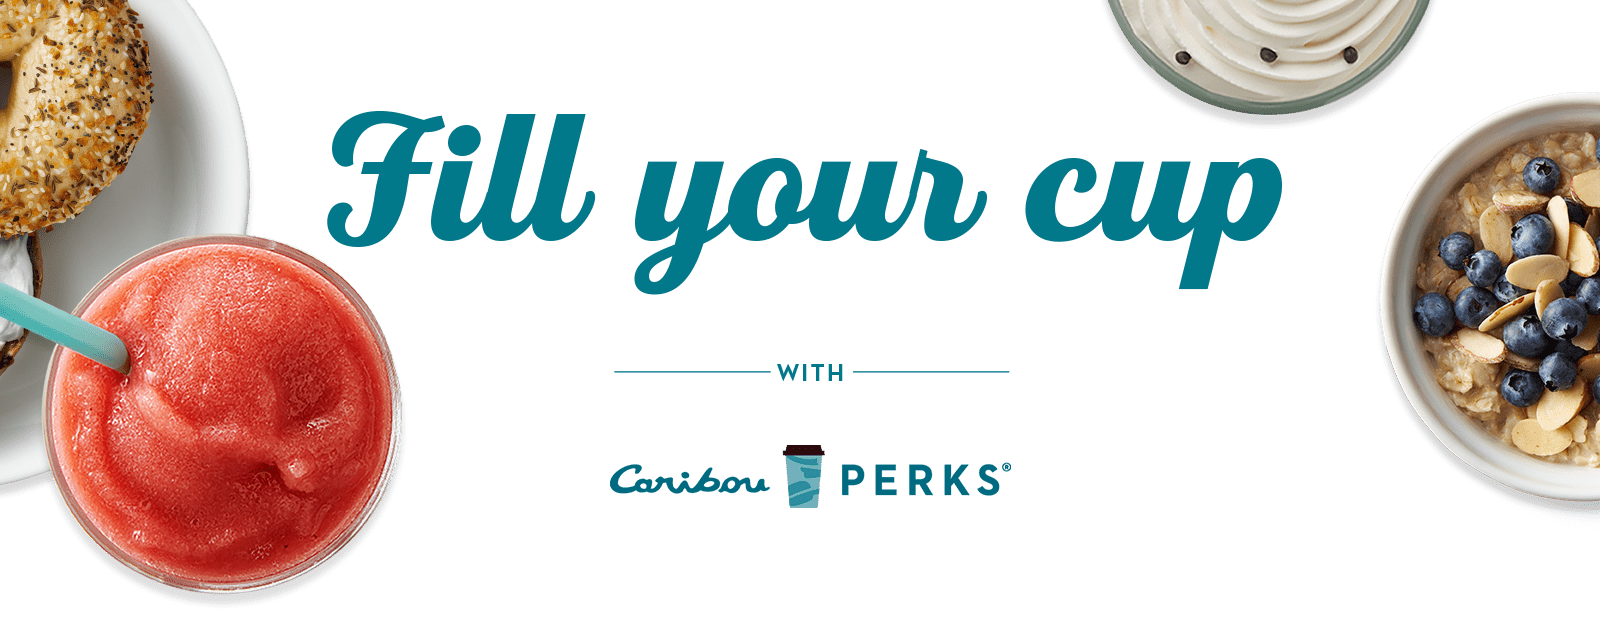 Fill your cup with Caribou Perks®